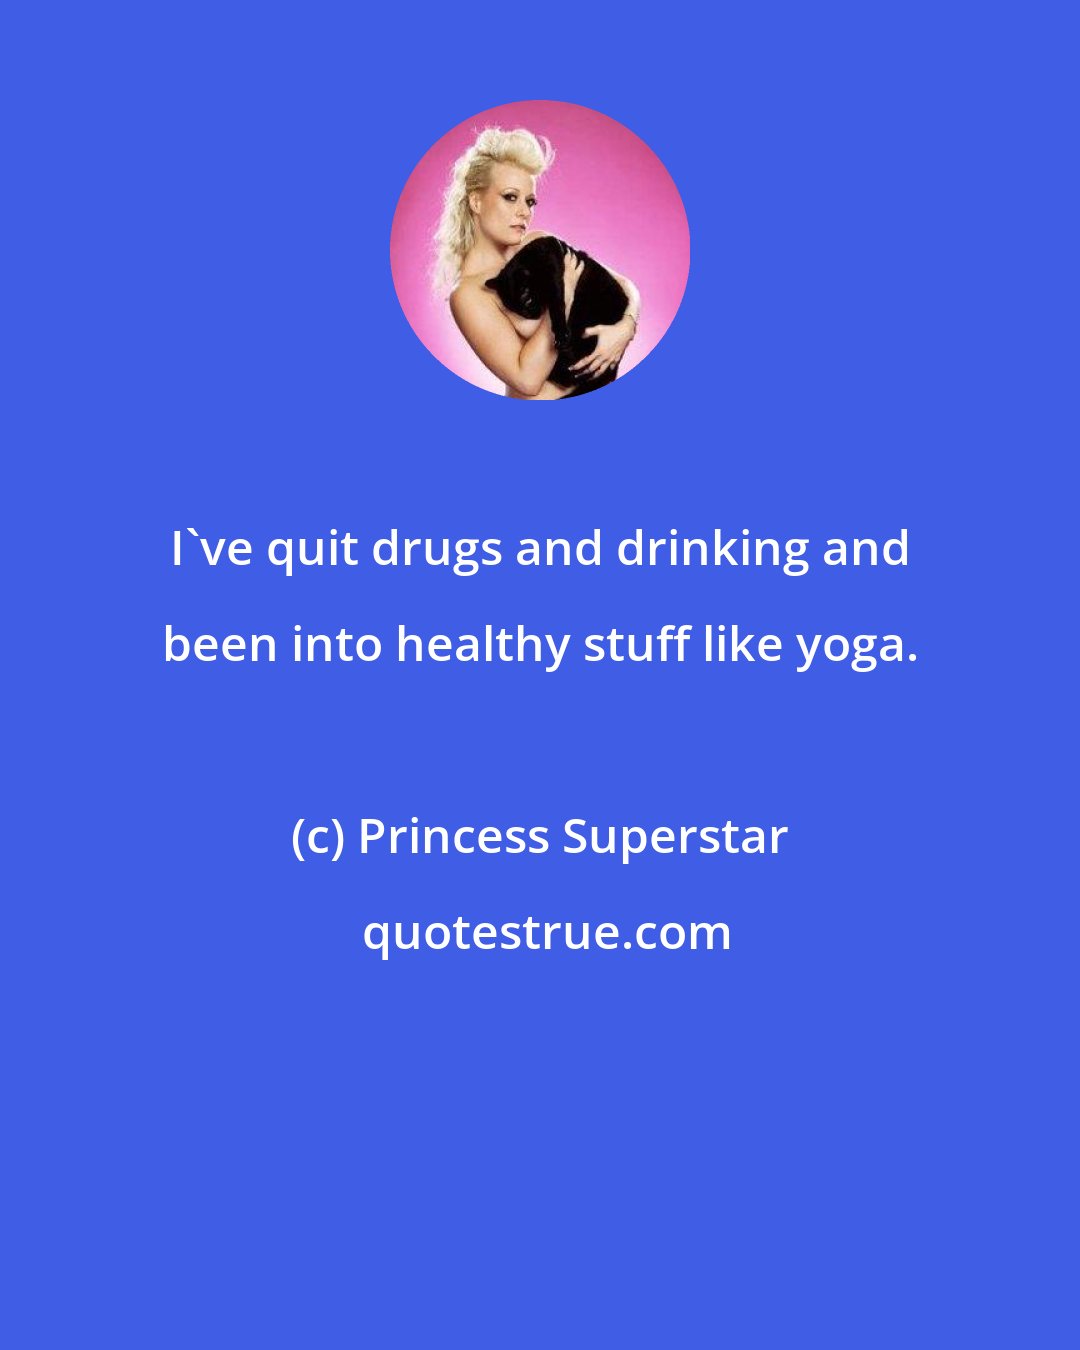 Princess Superstar: I've quit drugs and drinking and been into healthy stuff like yoga.